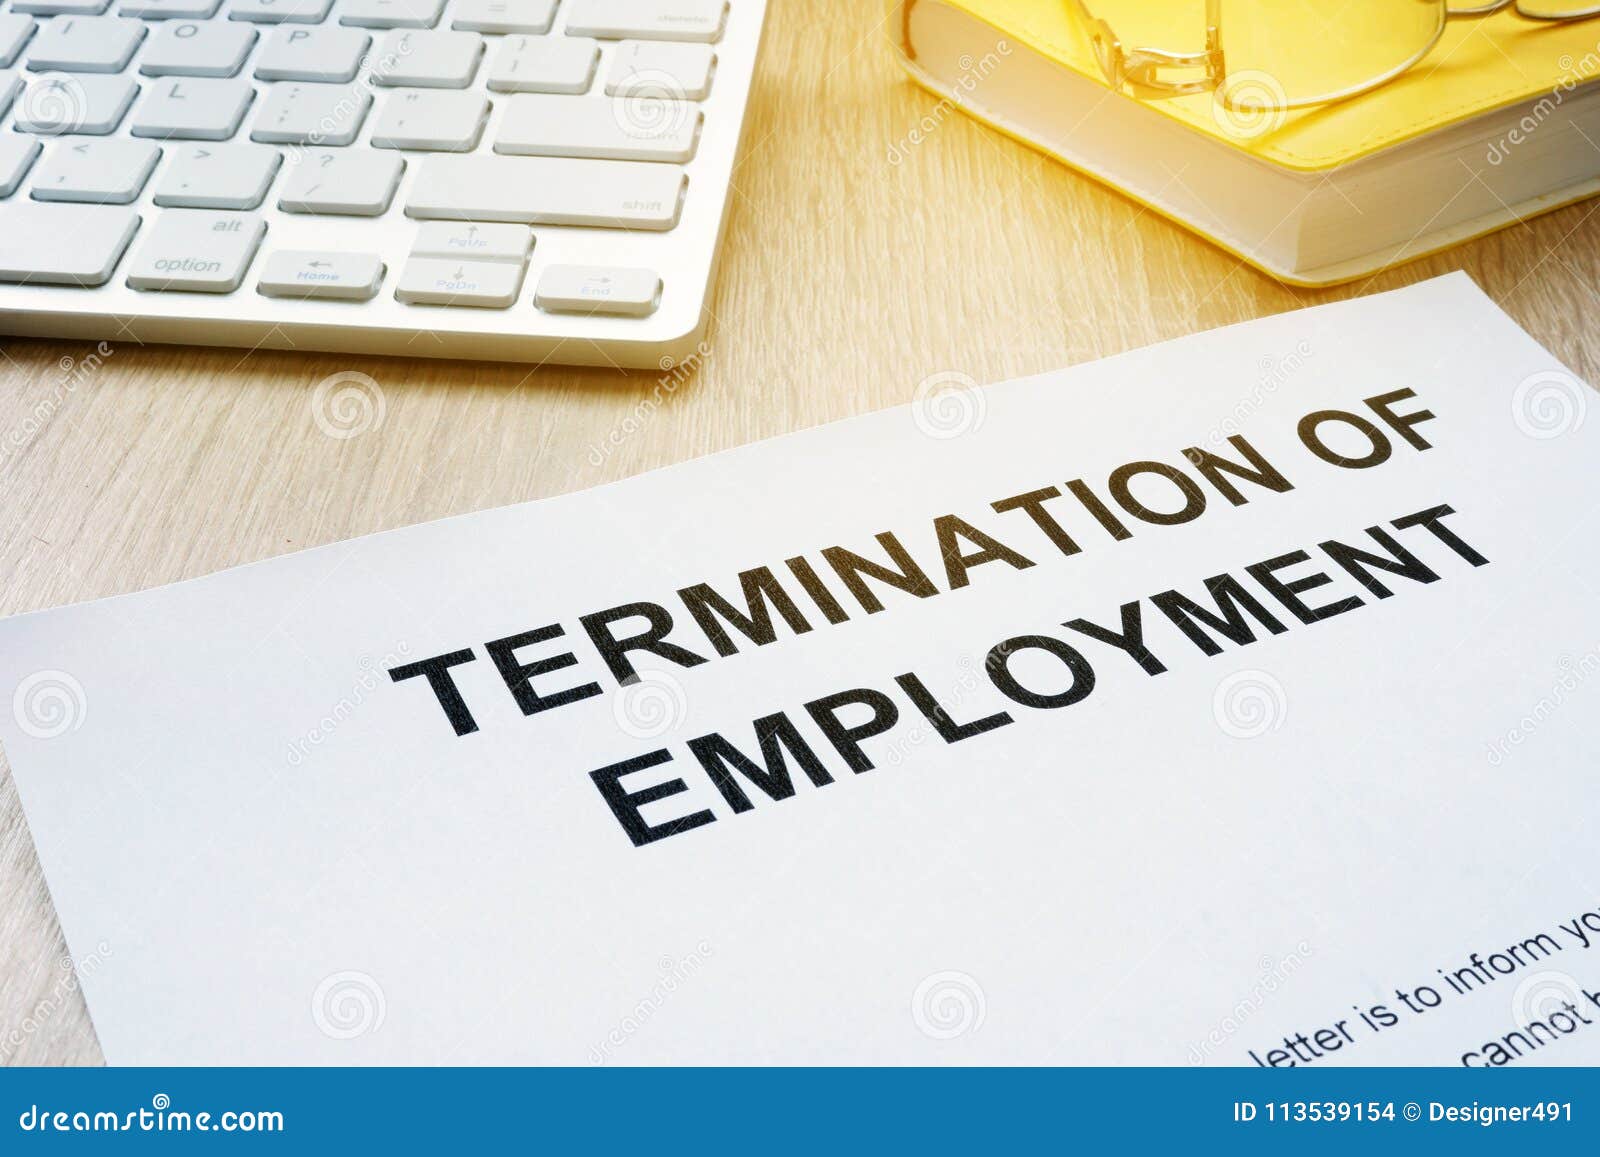 termination of employment on a desk.